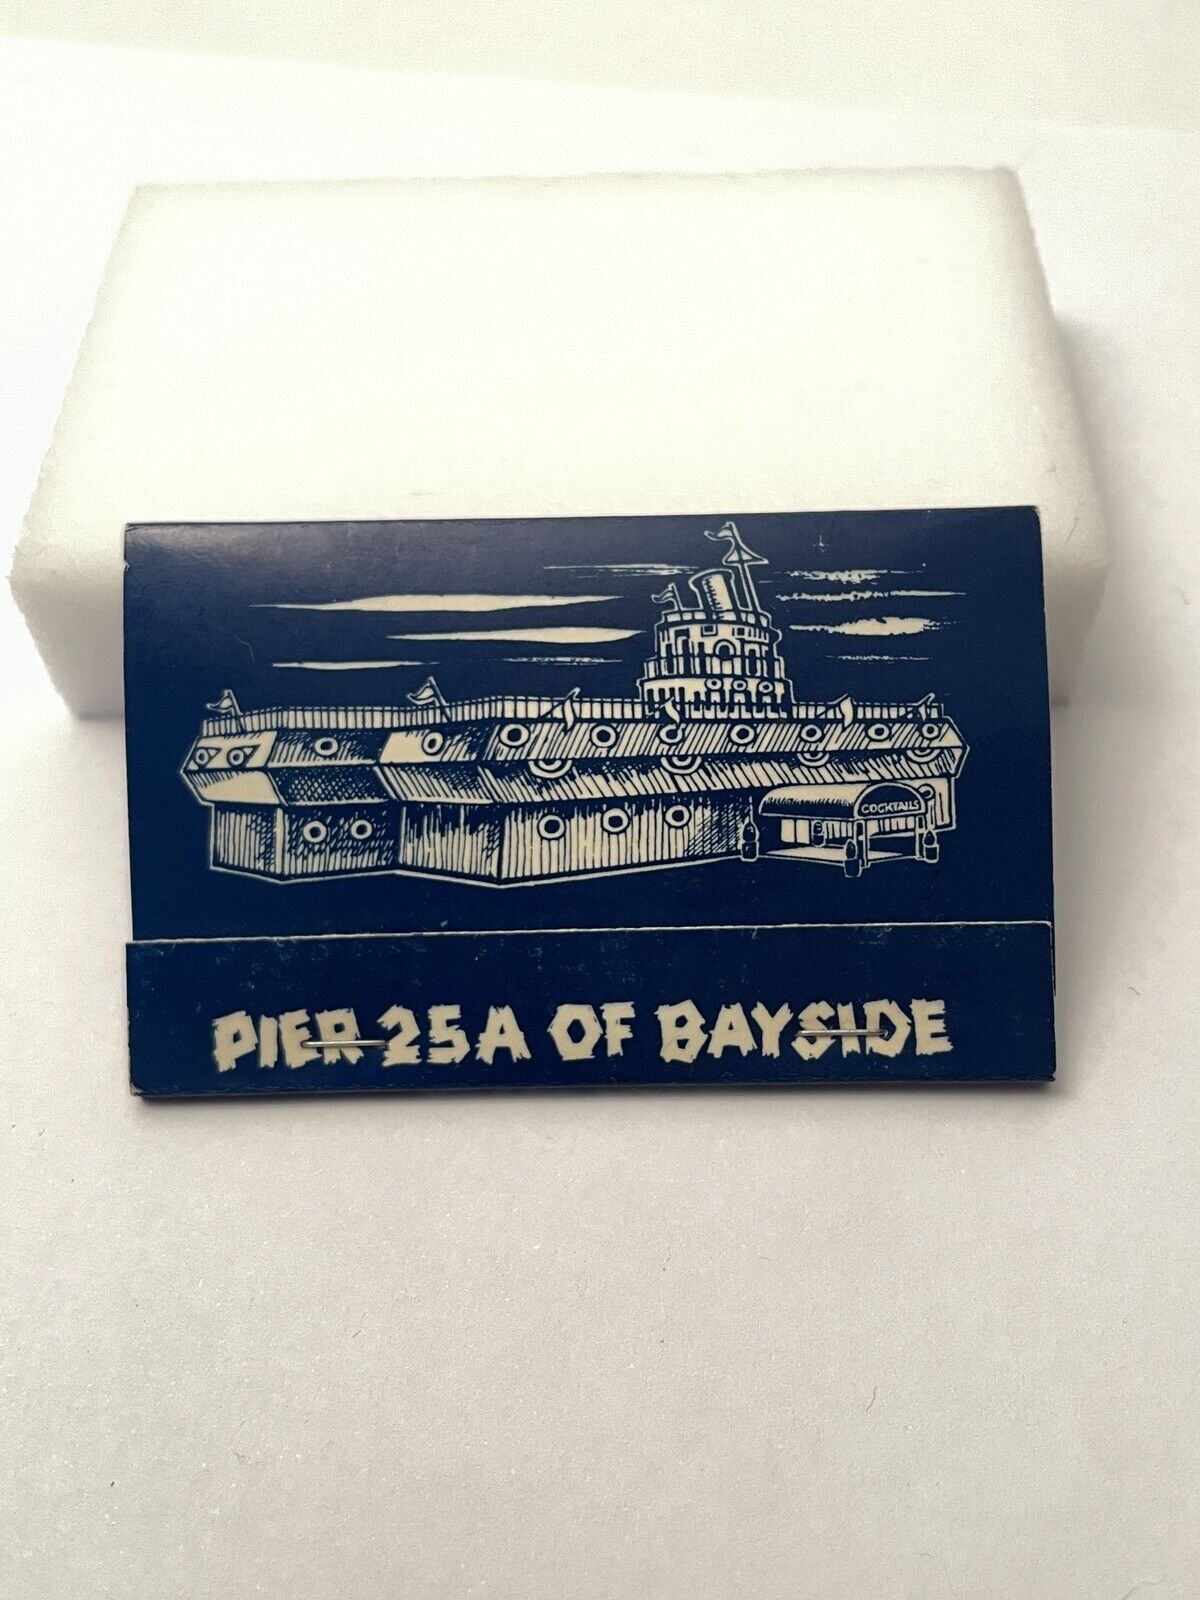 Vintage 1970s Pier 25A Restaurant Matchbook - Bayside Queens NYC Seafood